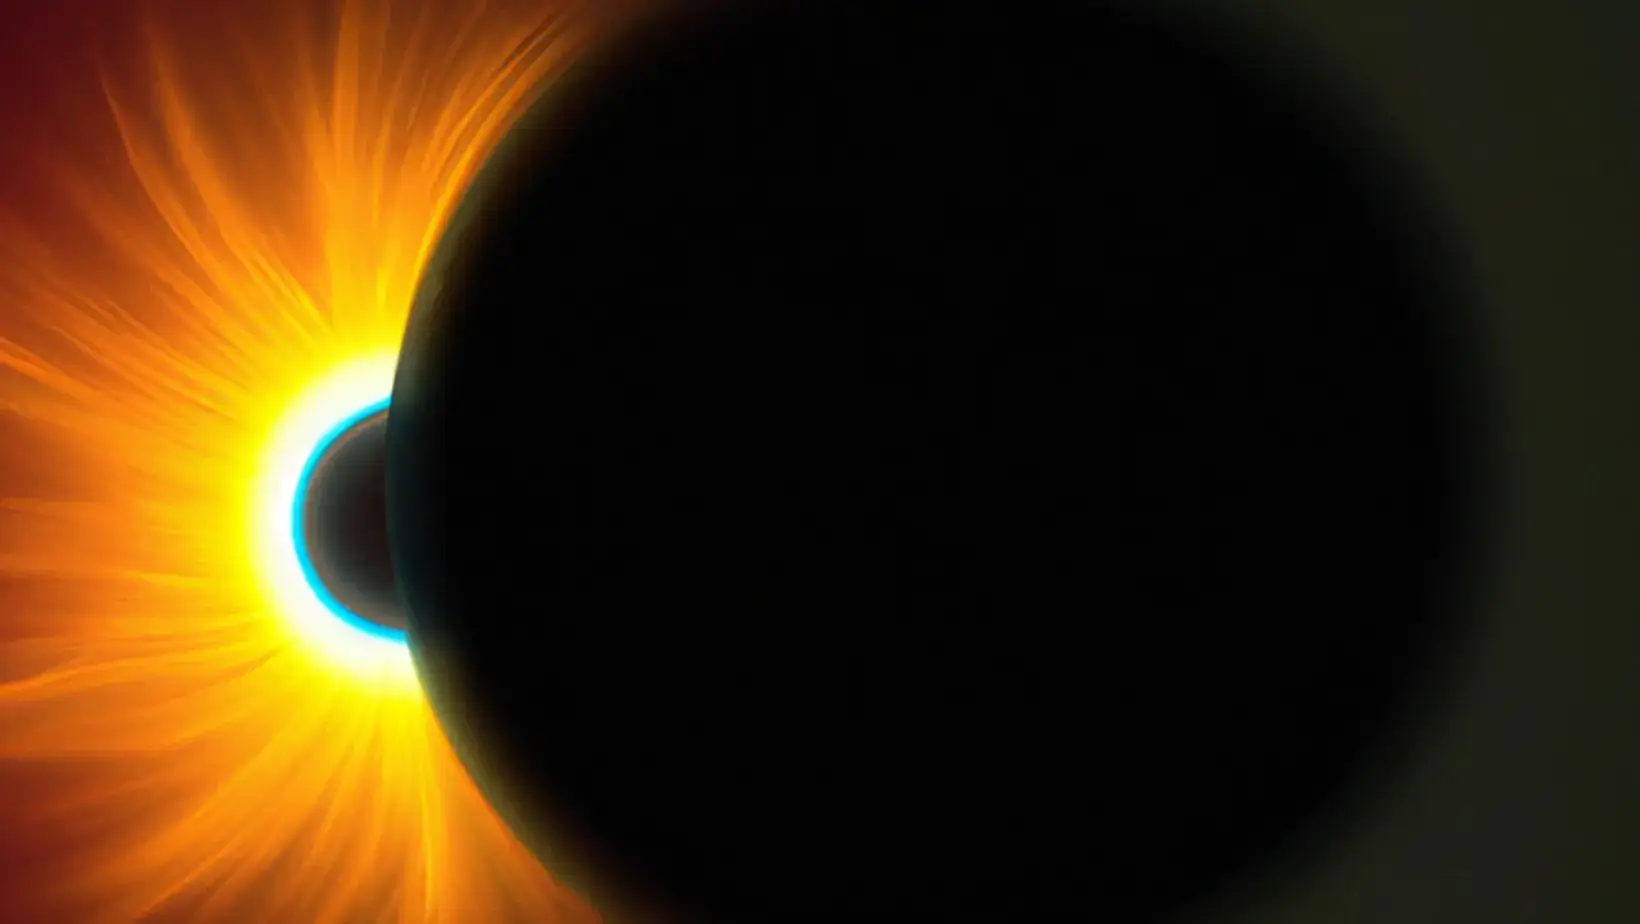 What if the sun becomes a black hole - featured image.